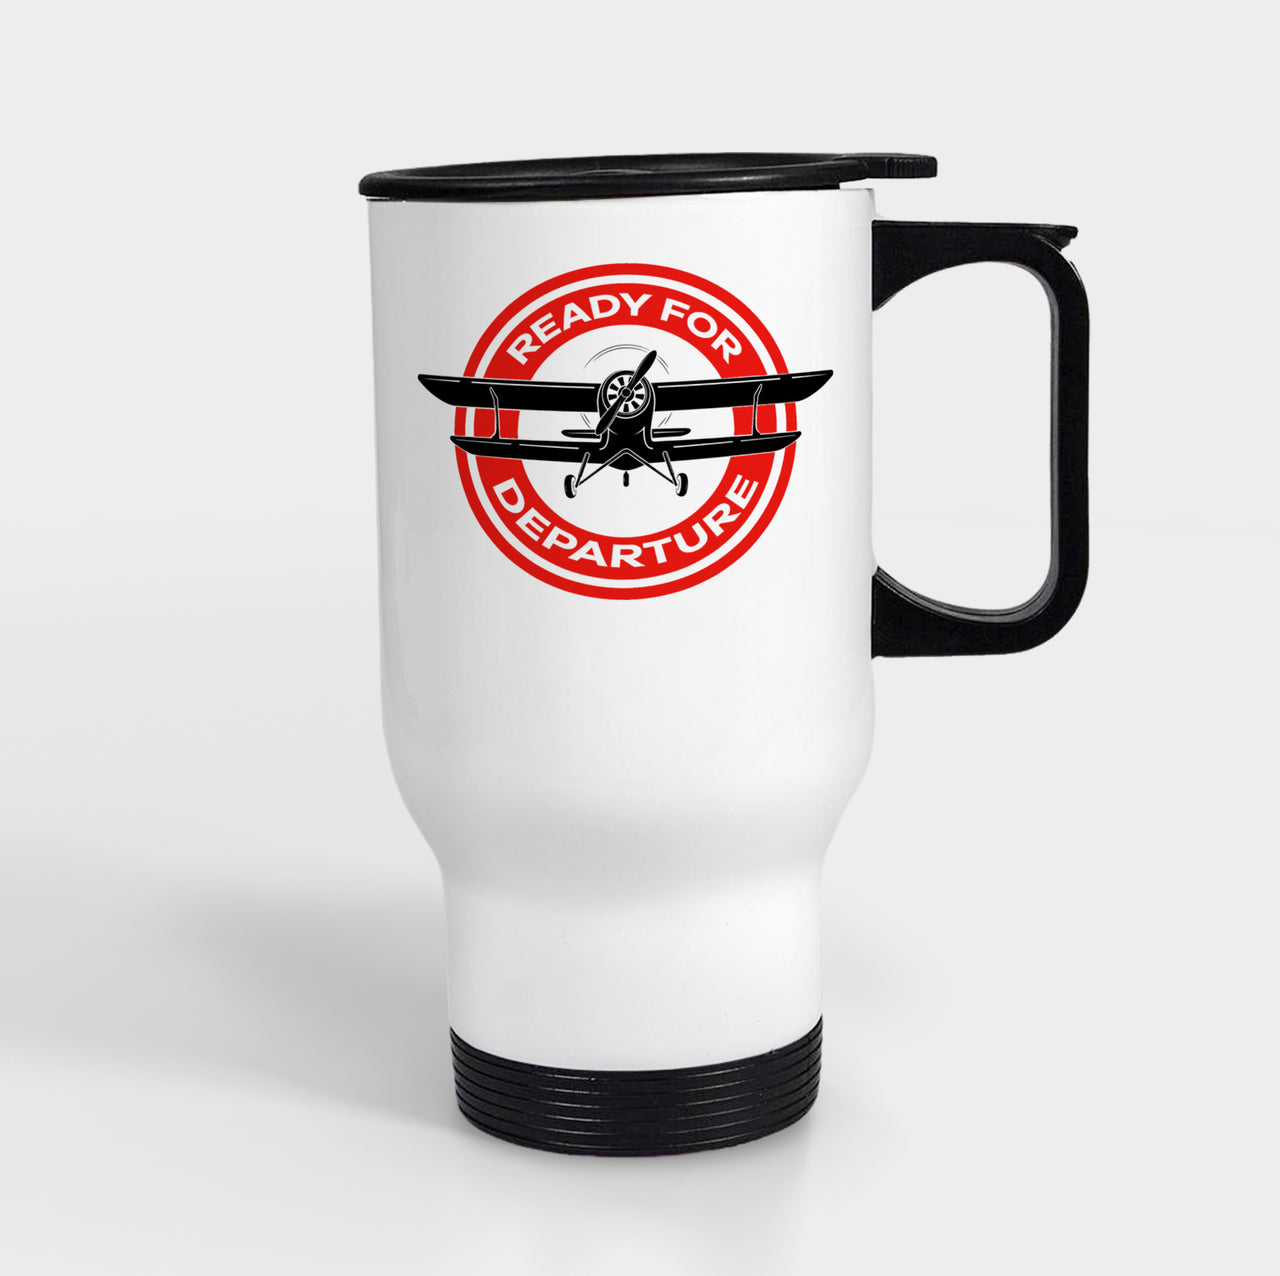 Ready for Departure Designed Travel Mugs (With Holder)